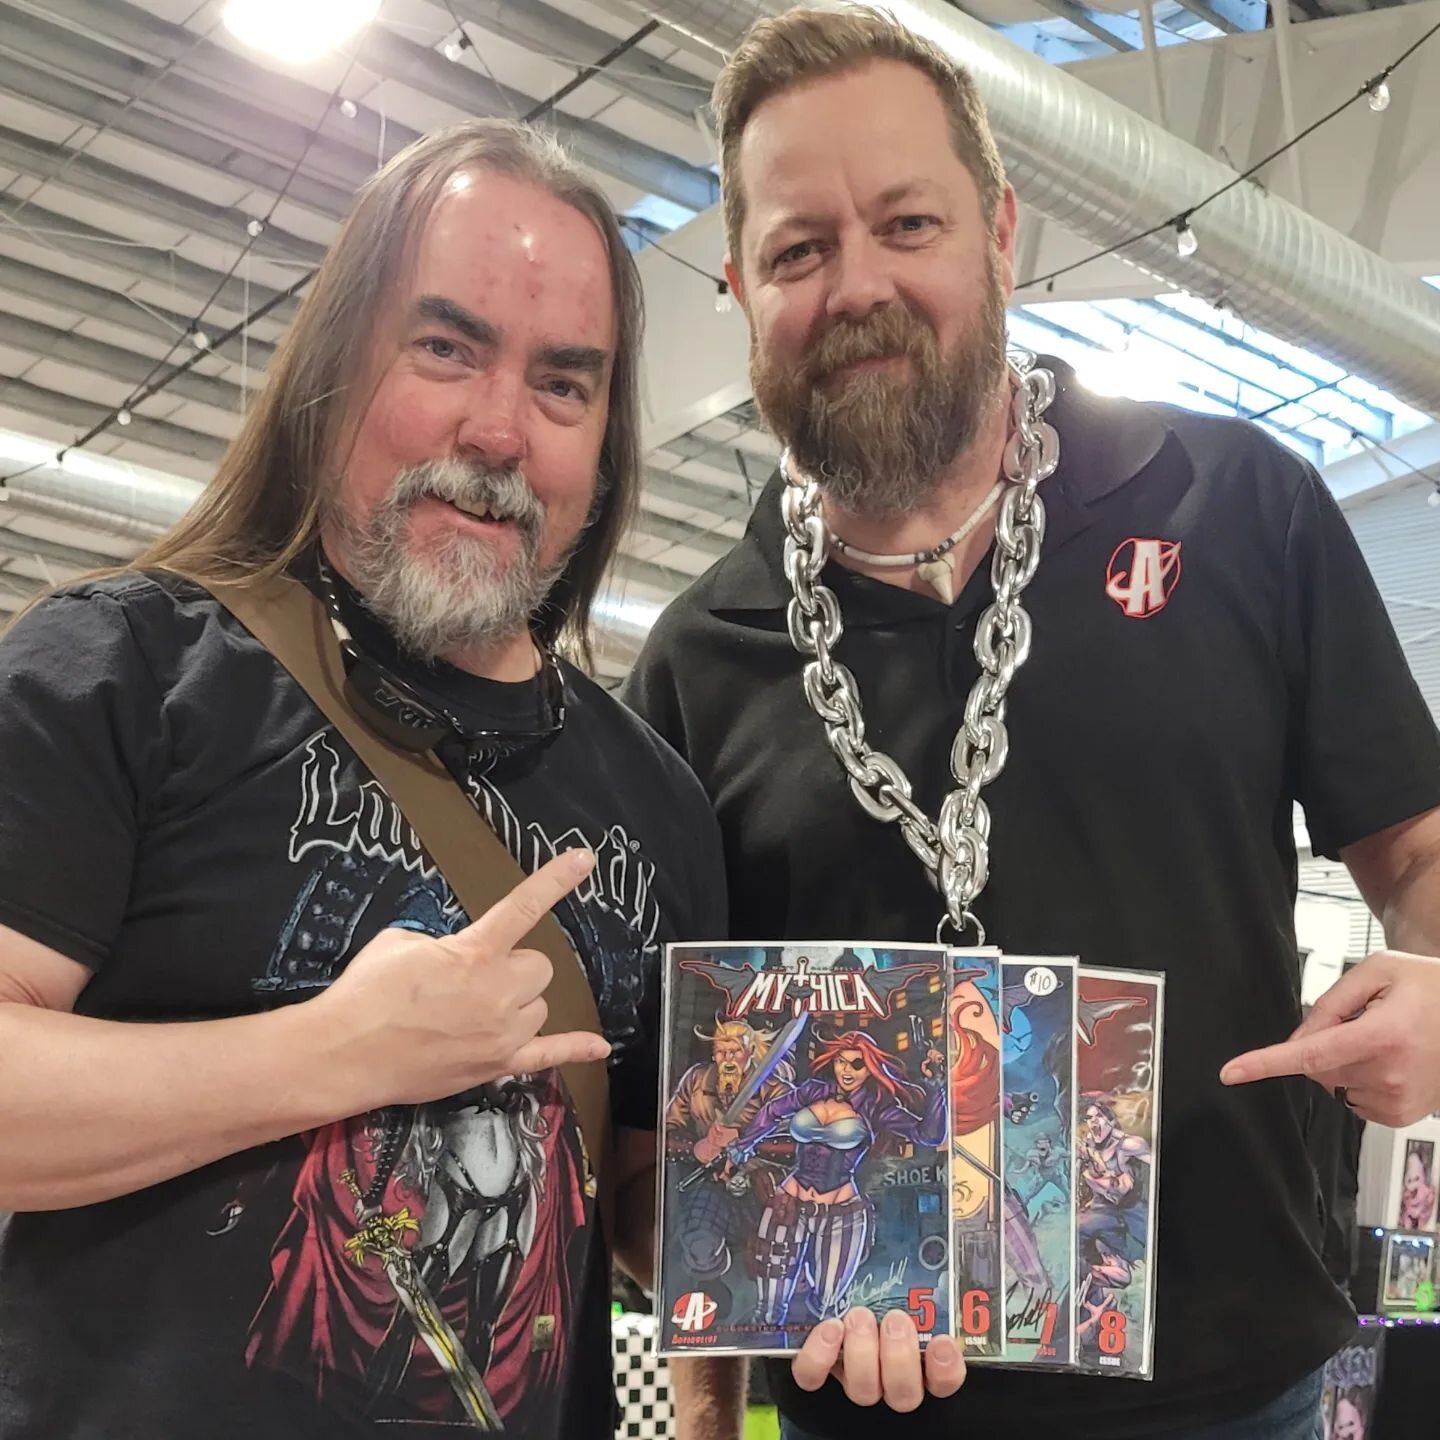 Mythica creator Matt Campbell with fans at the Wicked West Comic Expo. 
.
.
#mythicamaniacs #actionlinearmy #mythica #actionline #comics #artist #creatingcomics #comiccreator #fans #comicart #comiccon #comicconvention #heavymetal #metal #rockon